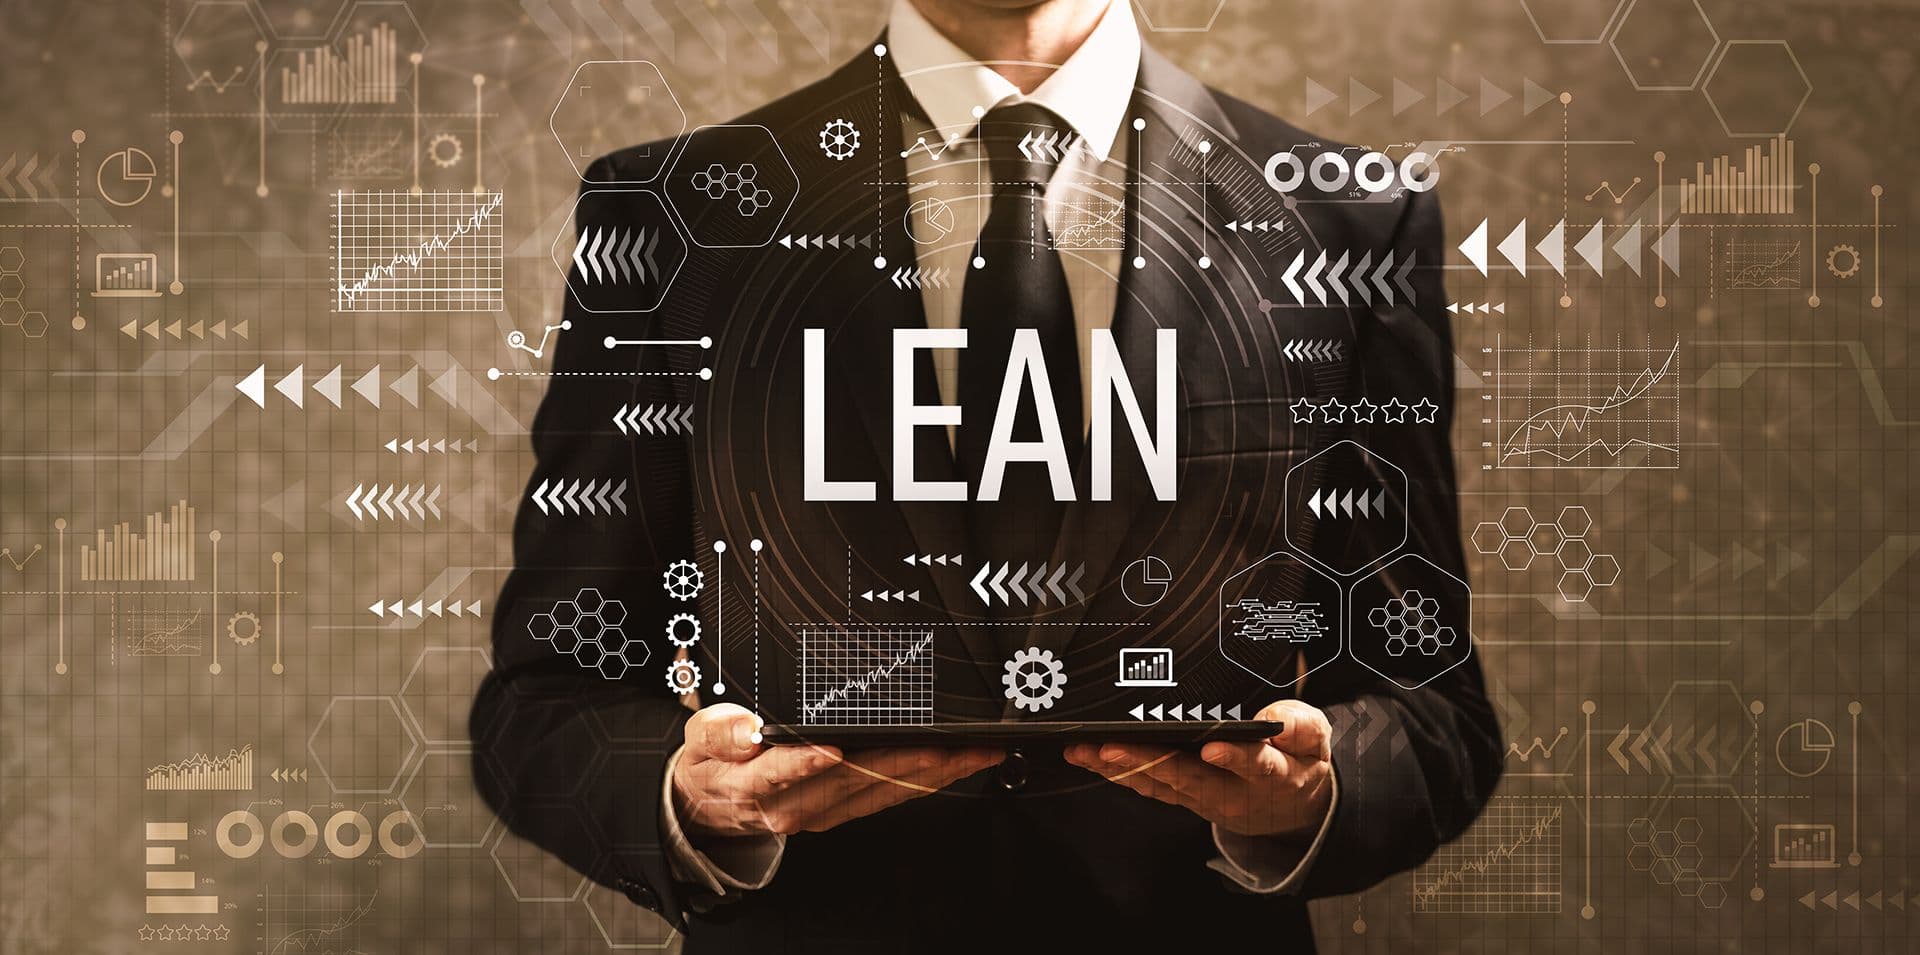 8 wastes in lean manufacturing